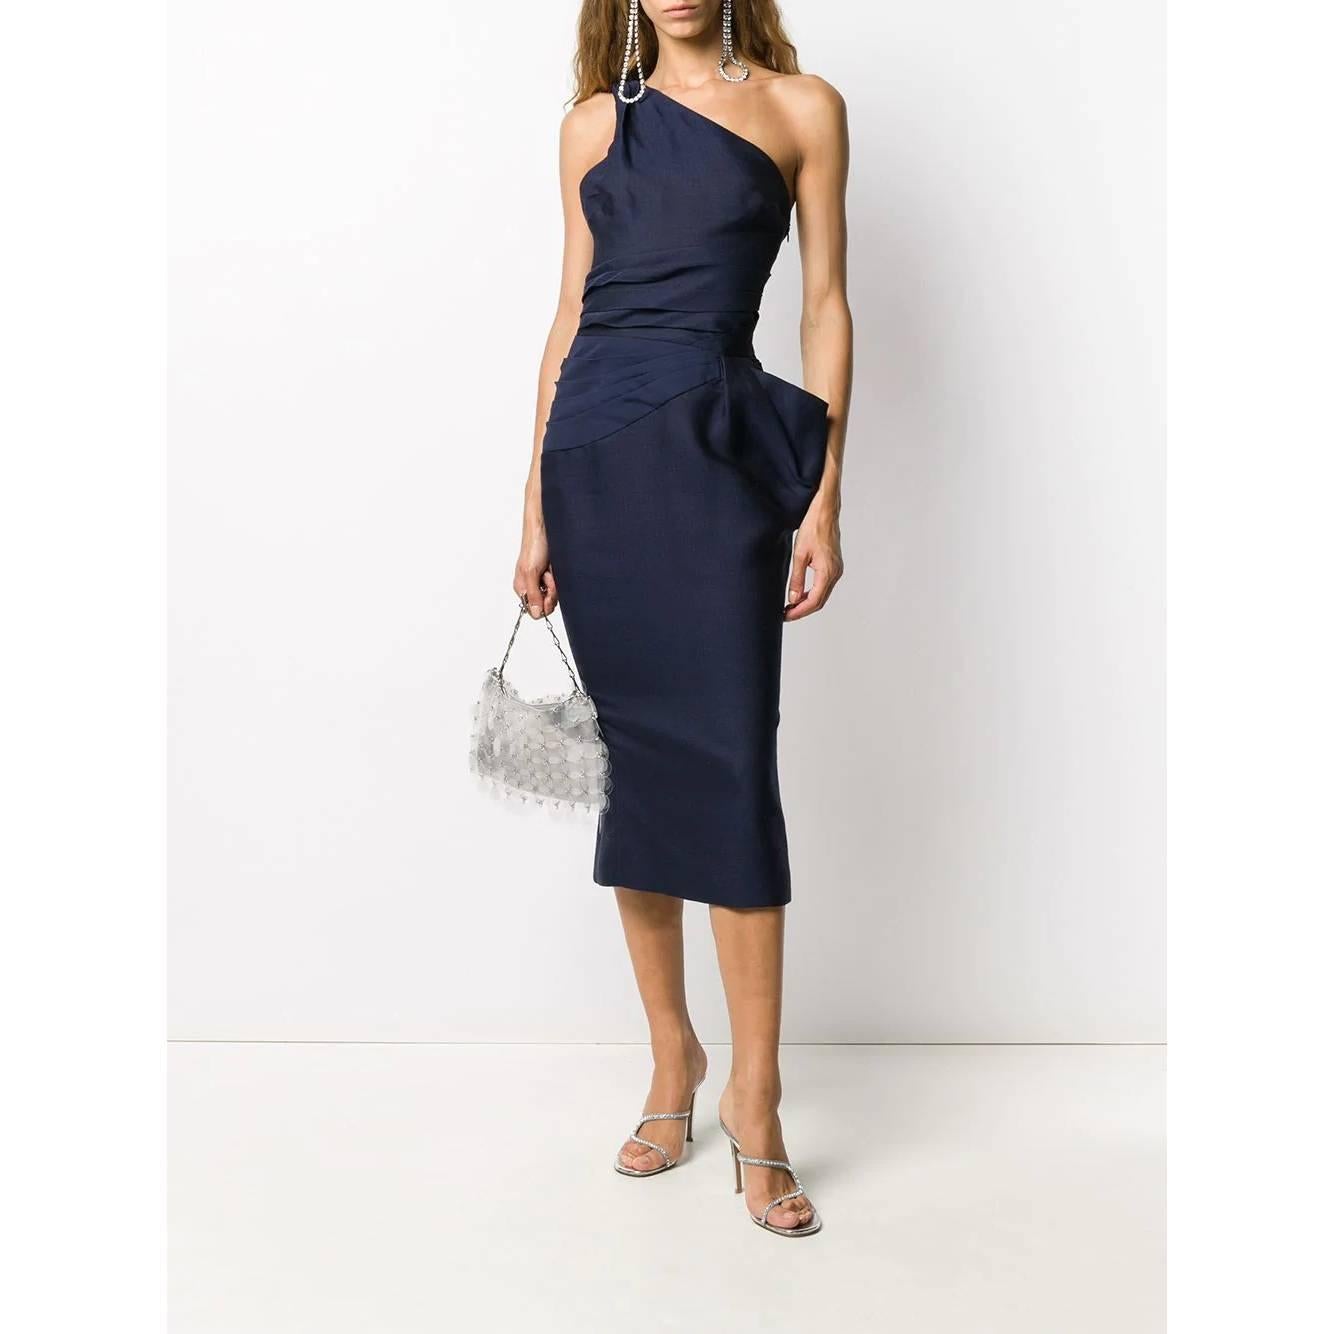 Versace blue wool midi dress. One-shoulder model, fitted silhouette and draped detail at the waist. Side zip closure and back vent.

Years: 2000s

Made in Italy

Size: 38 IT

Flat measurements
Height: 125 cm
Bust: 37 cm
Waist: 31 cm
Hips: 46 cm